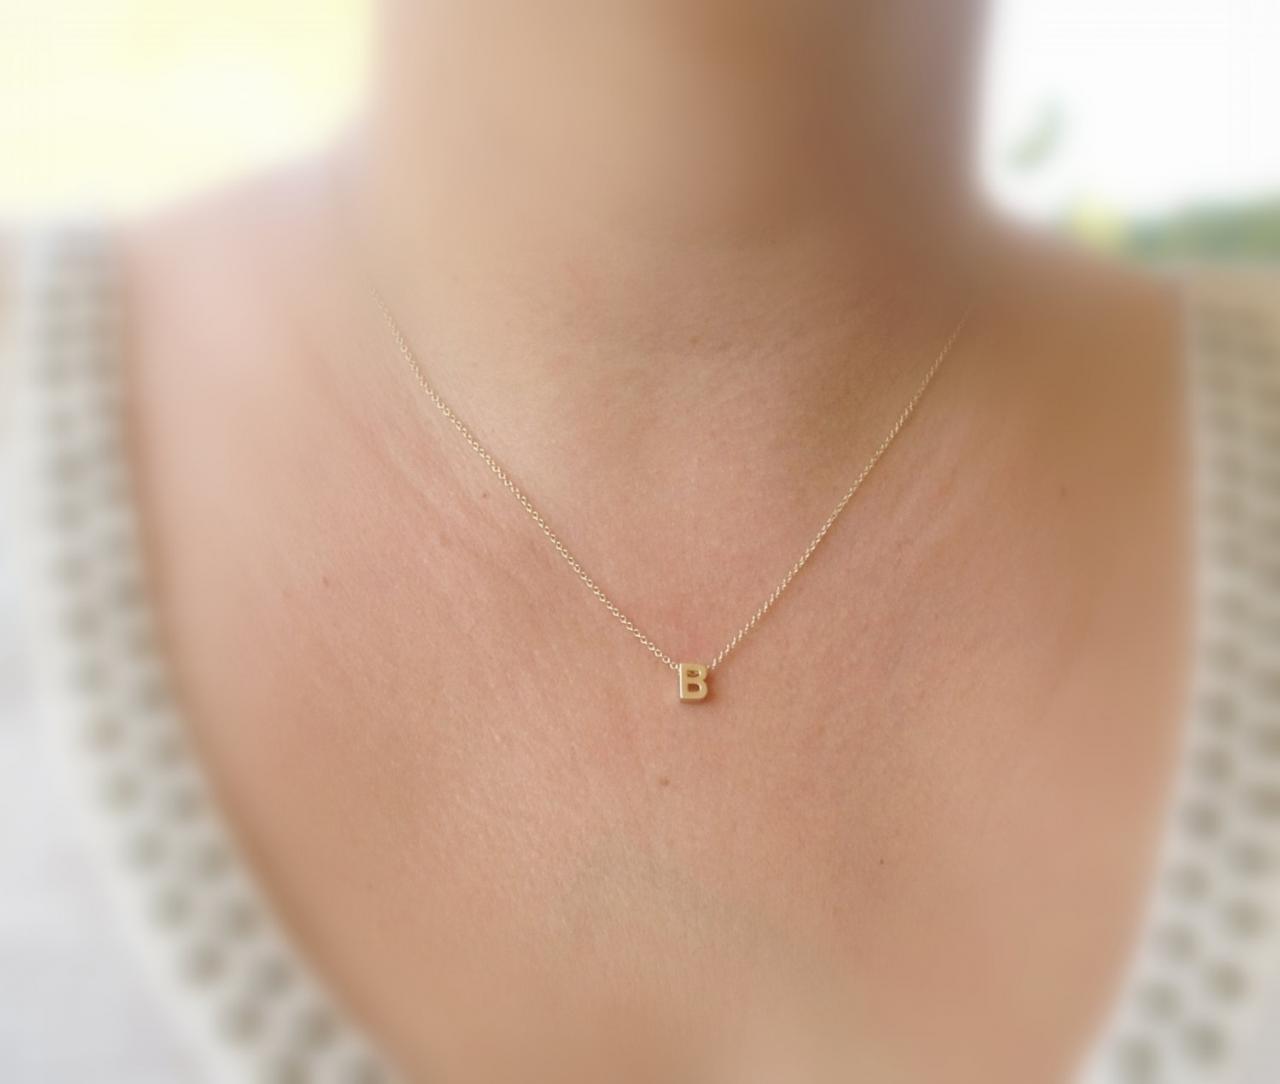 Initial Necklace, Gold Filled Initial Necklace, Name Necklace, Alfabet Necklace, Personalized Necklace,1 Monogram Necklace, Friendship 505